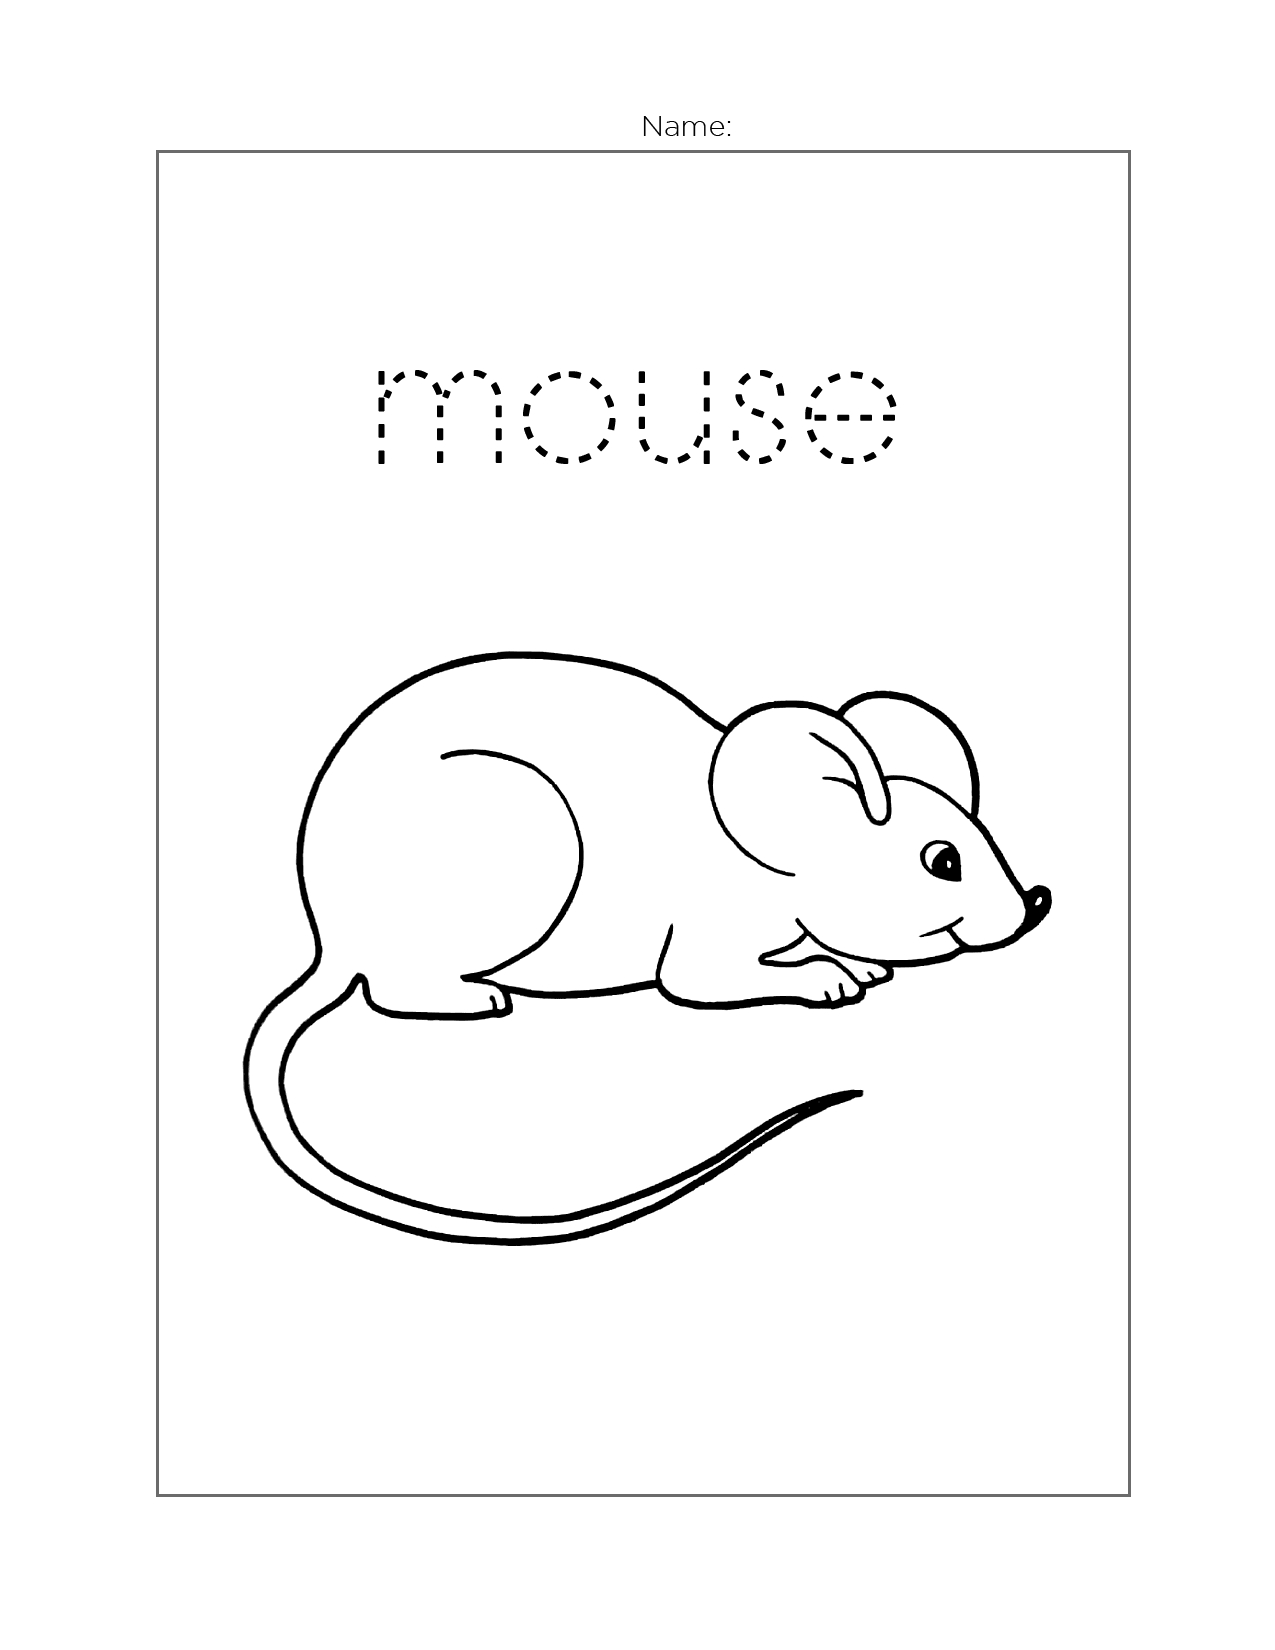 Mouse Spelling Coloring Sheet